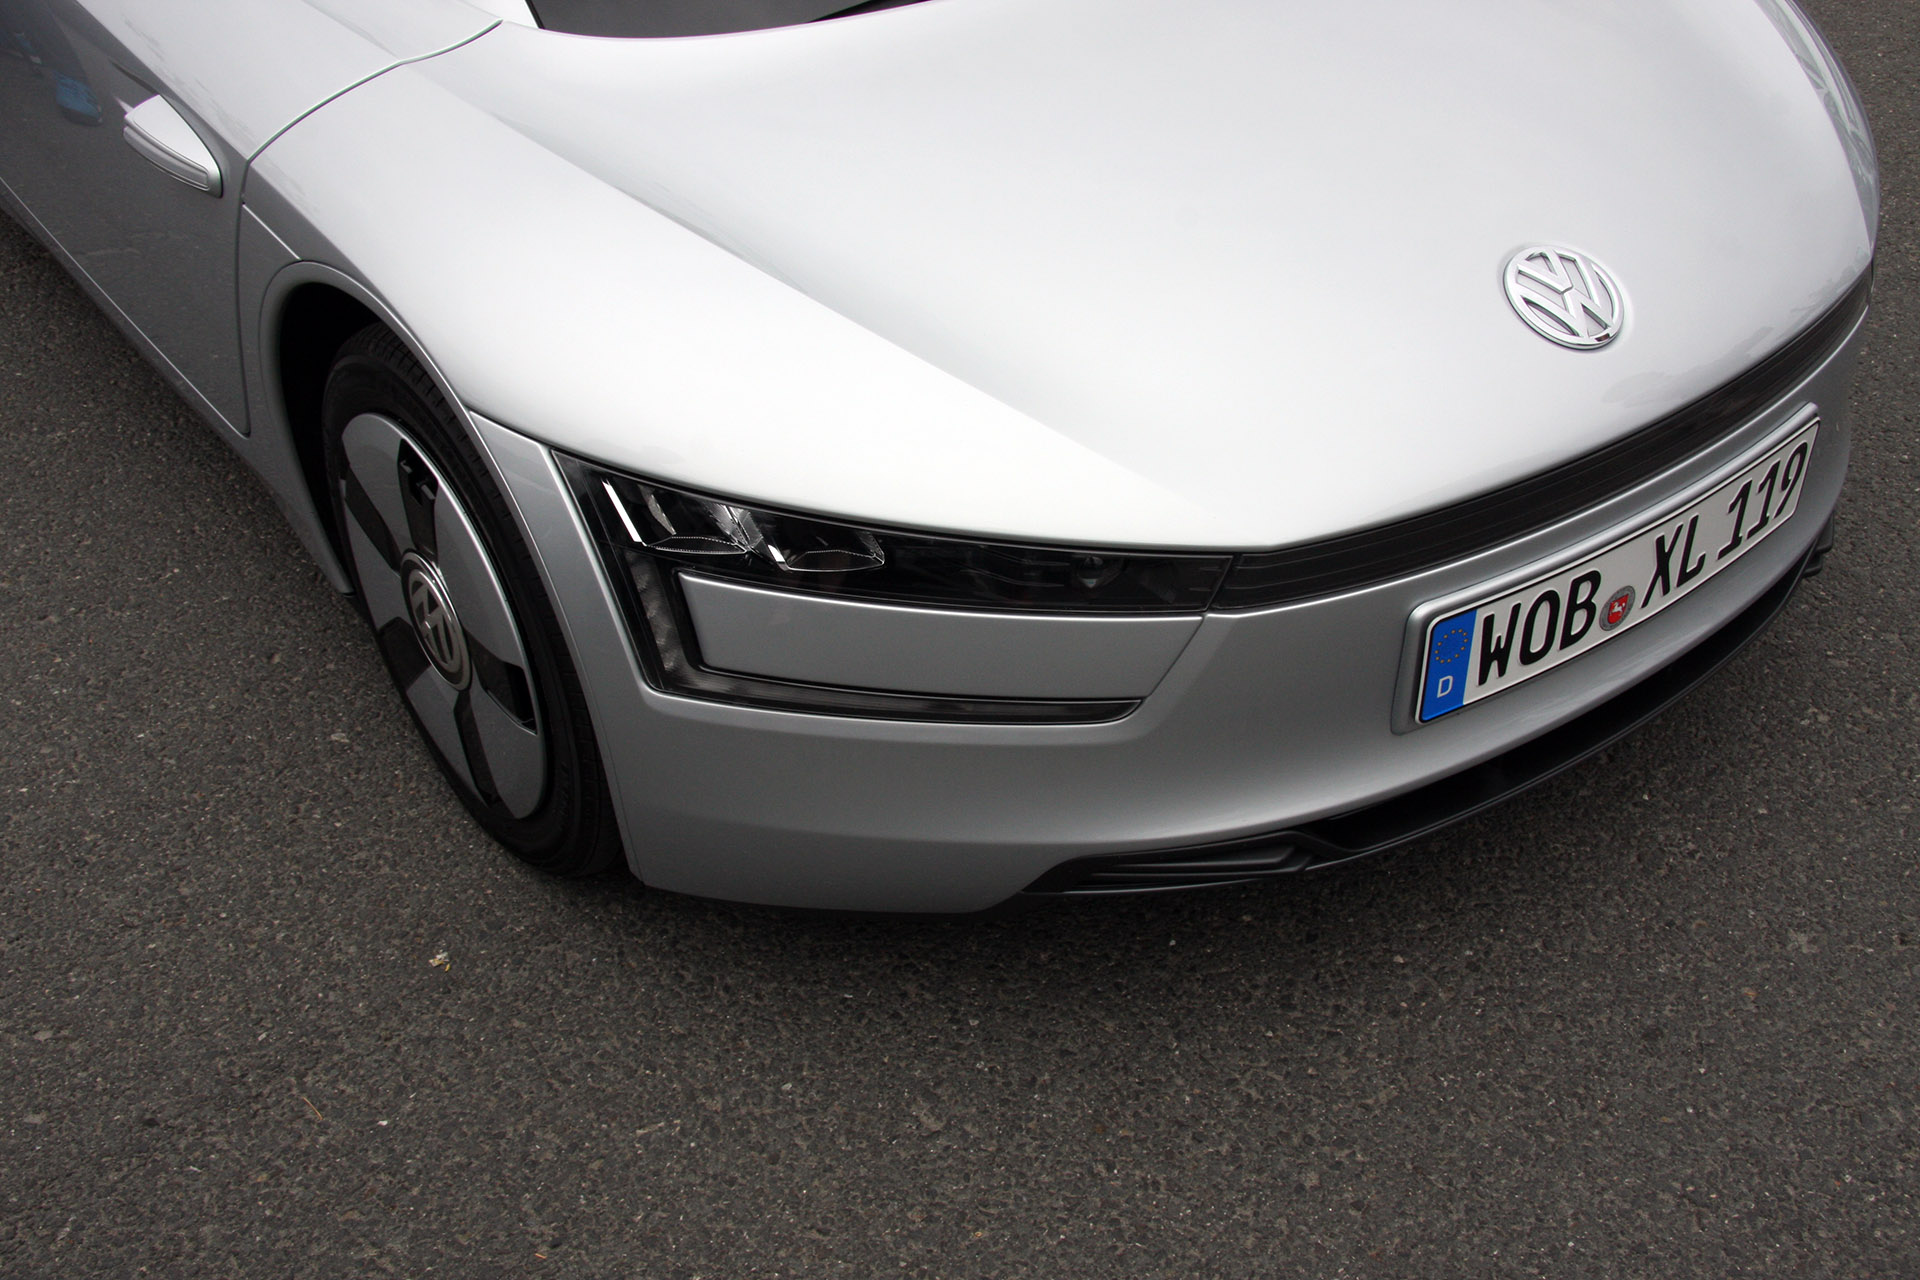 Driving Volkswagen’s 0.9L/100km Car Is Like Driving The Future